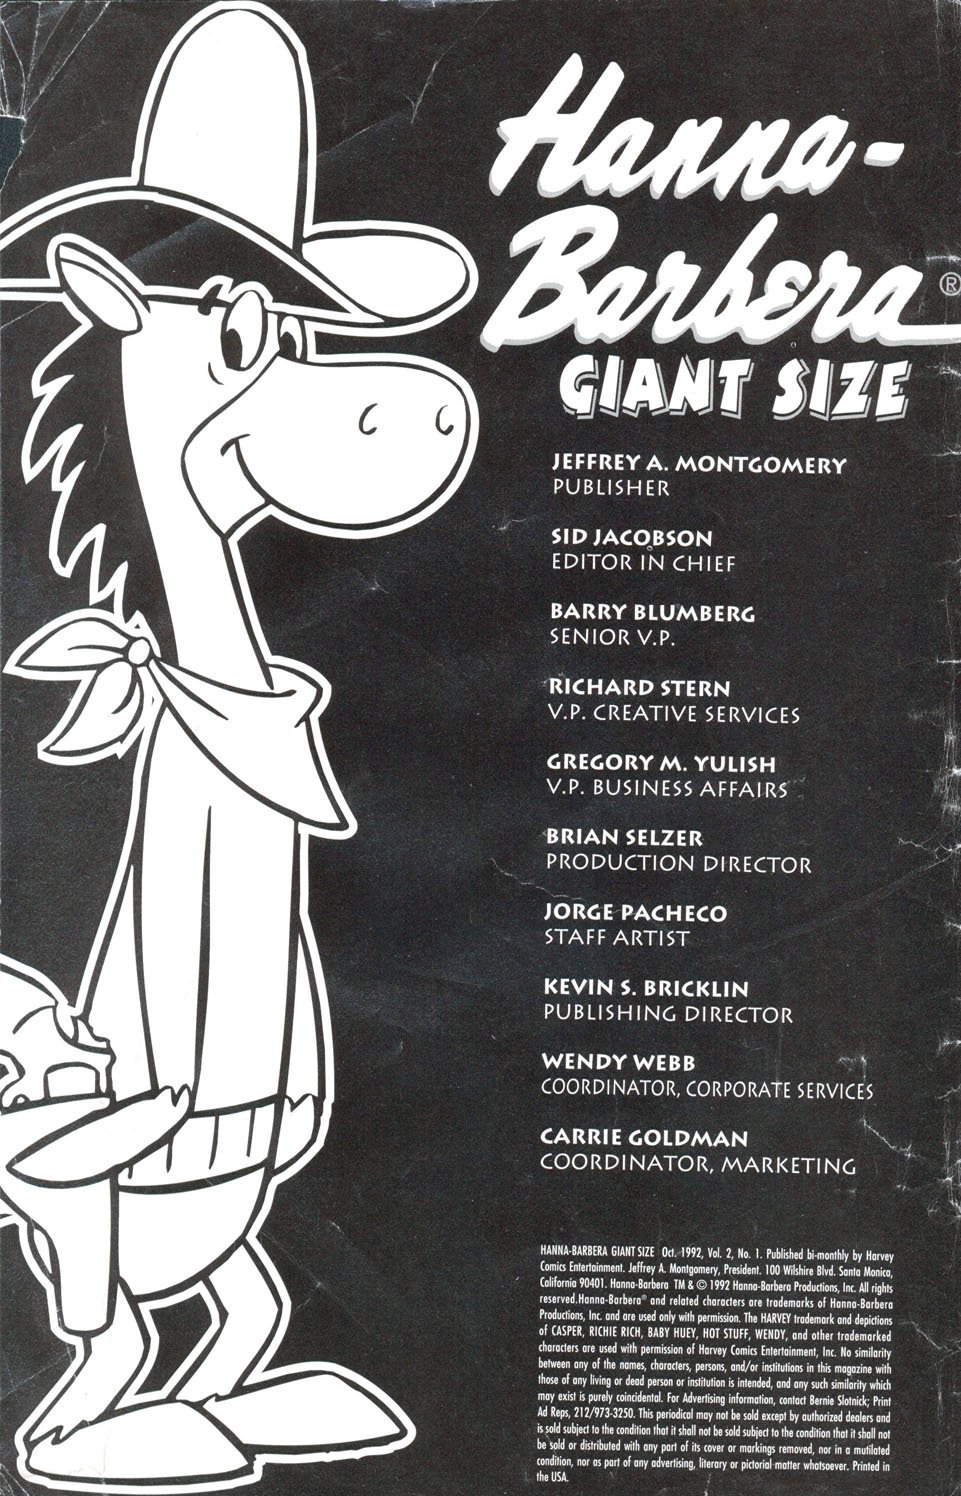 Read online Hanna Barbera Giant Size comic -  Issue #1 - 2